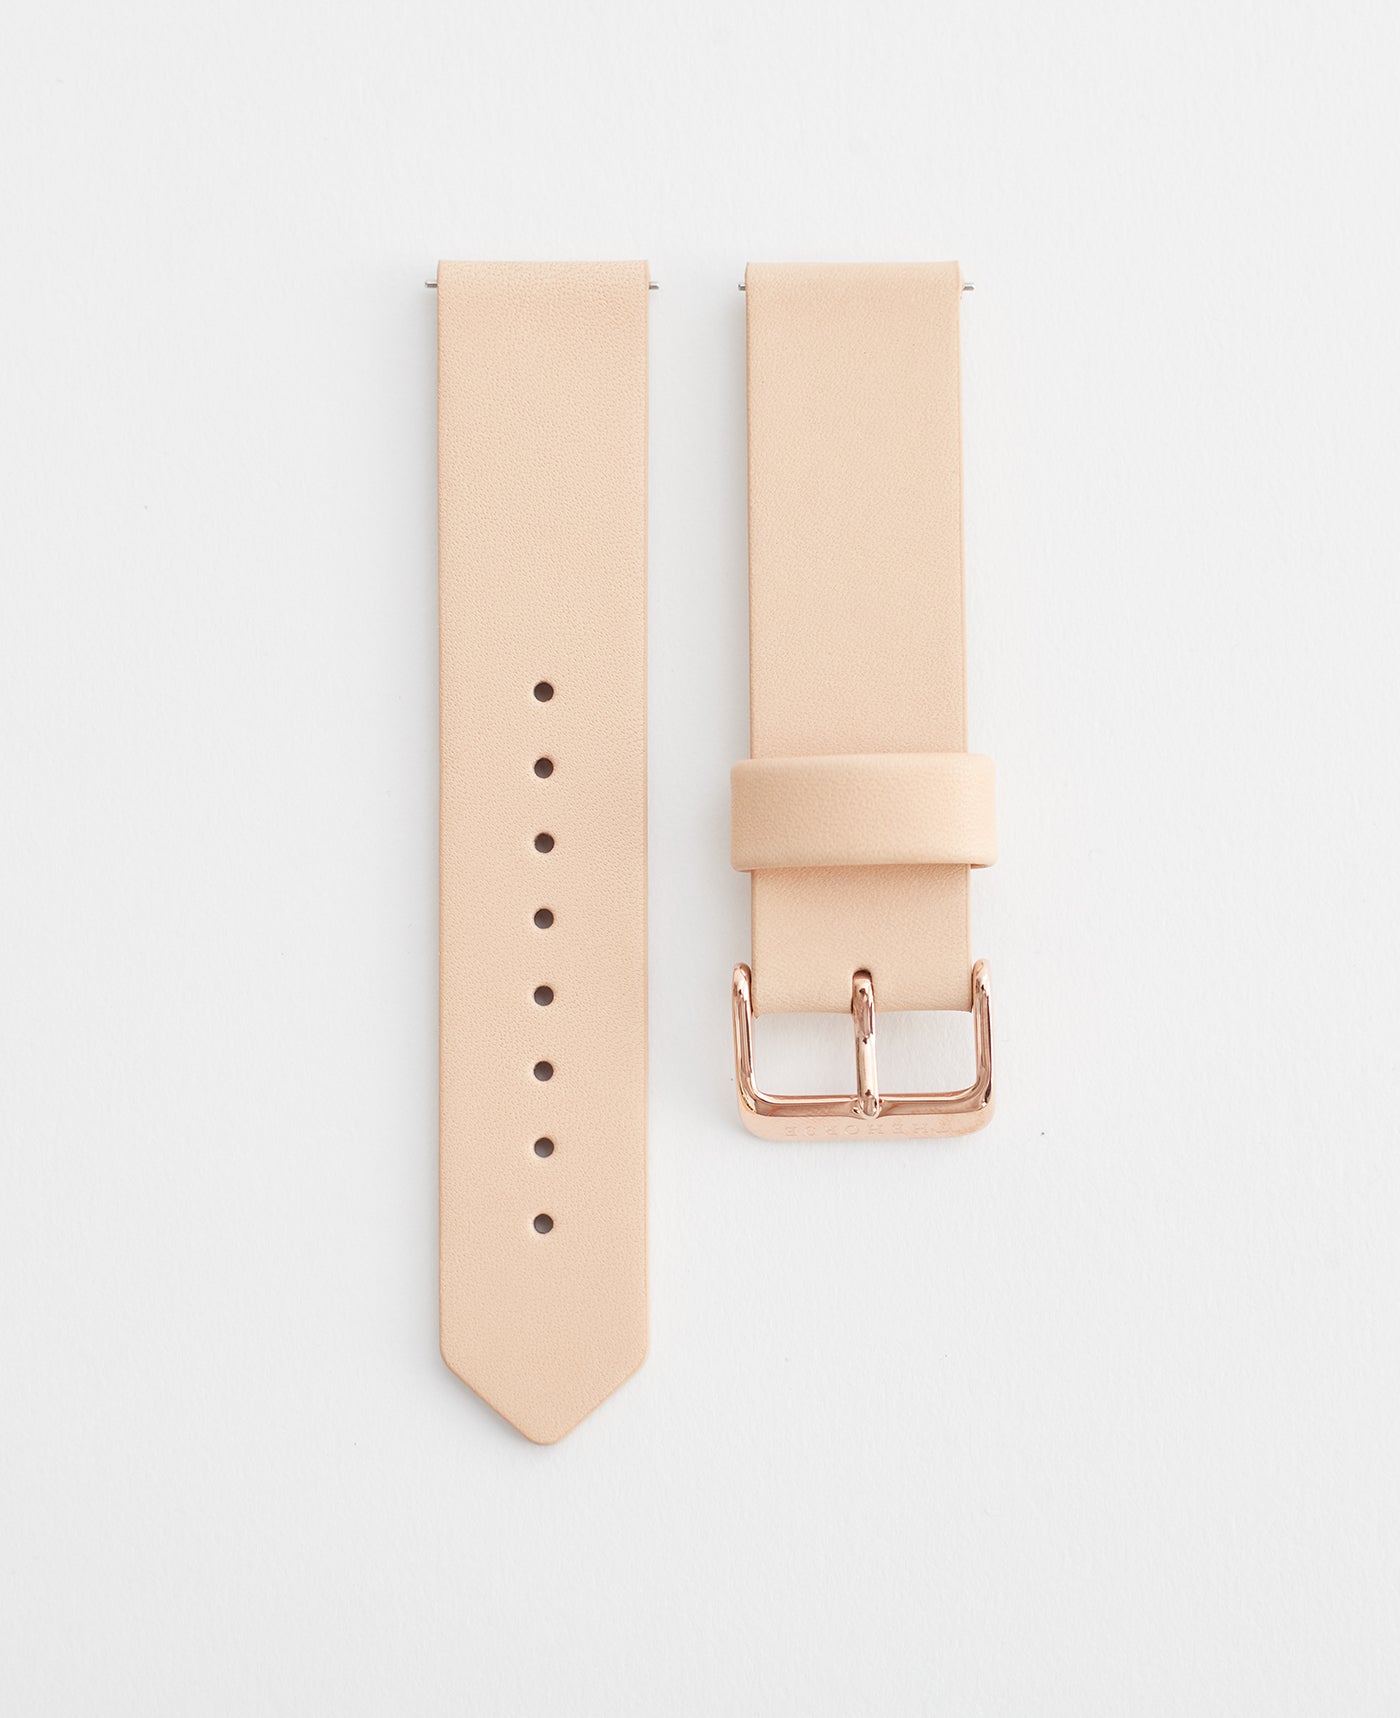 The 20mm Original Watch in Vegetable Tan Leather + Rose Gold Strap by The Horse®